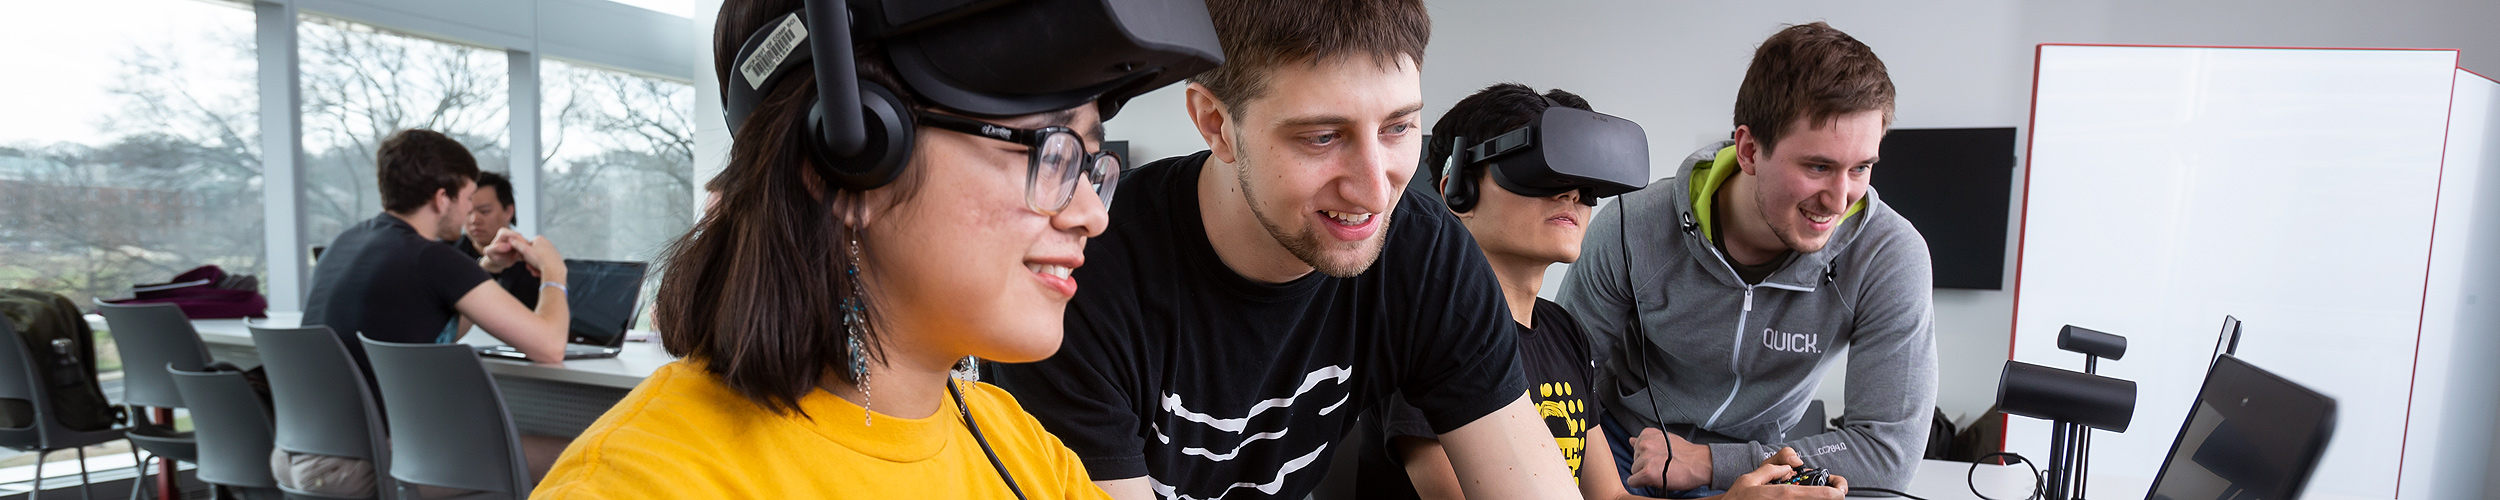 Several undergraduate students, two wearing virtual reality headsets, working in a classroom